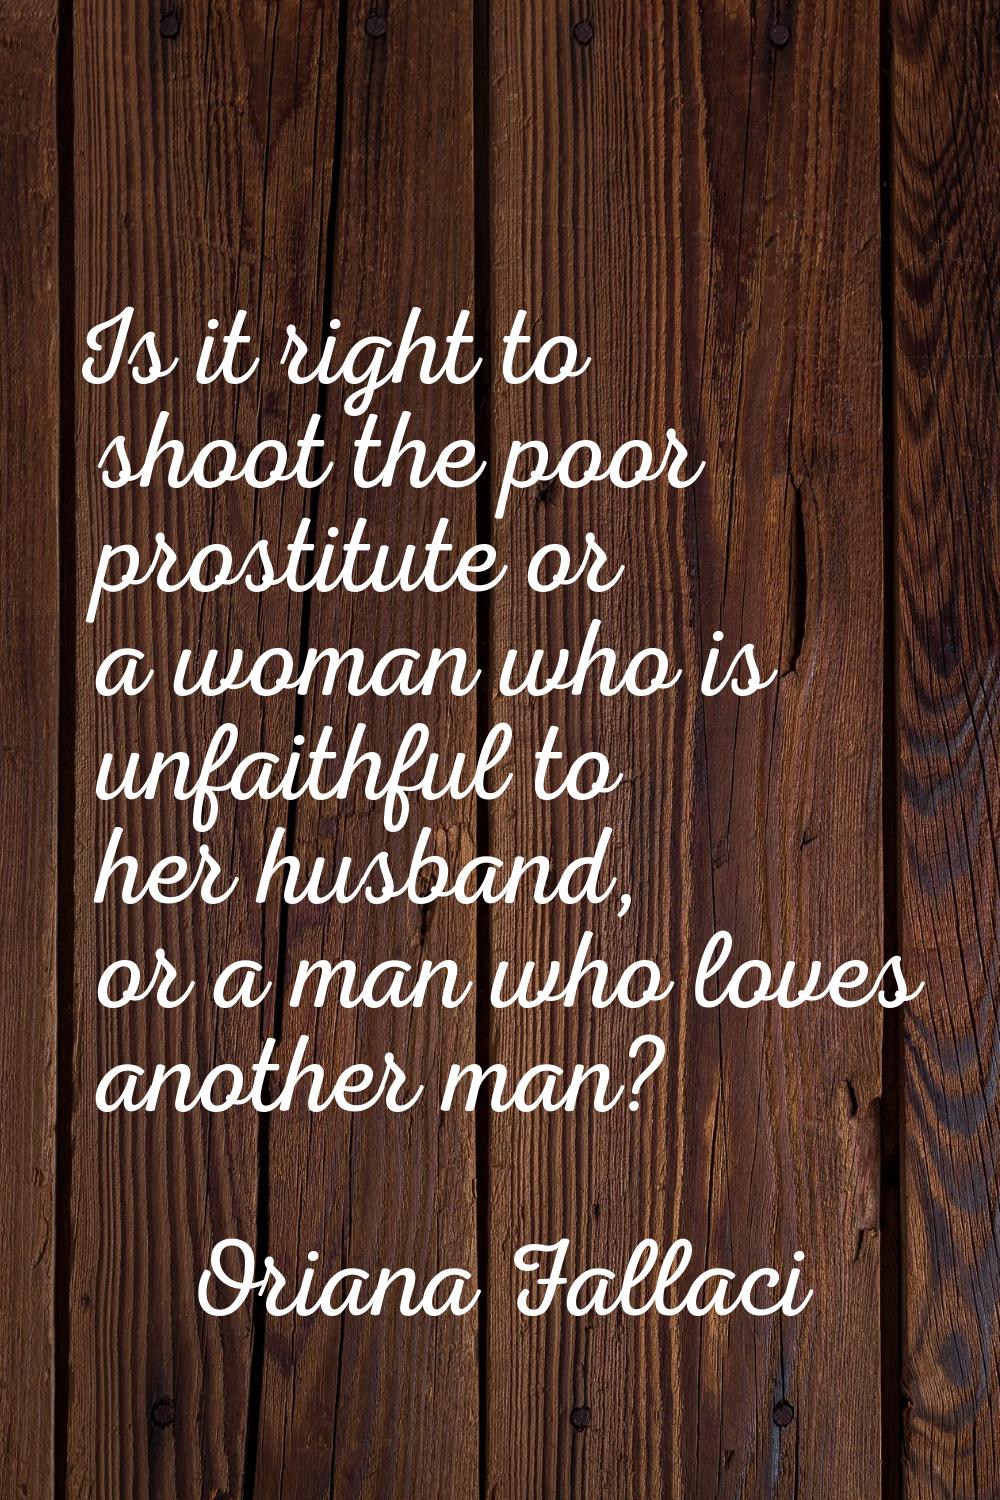 Is it right to shoot the poor prostitute or a woman who is unfaithful to her husband, or a man who 